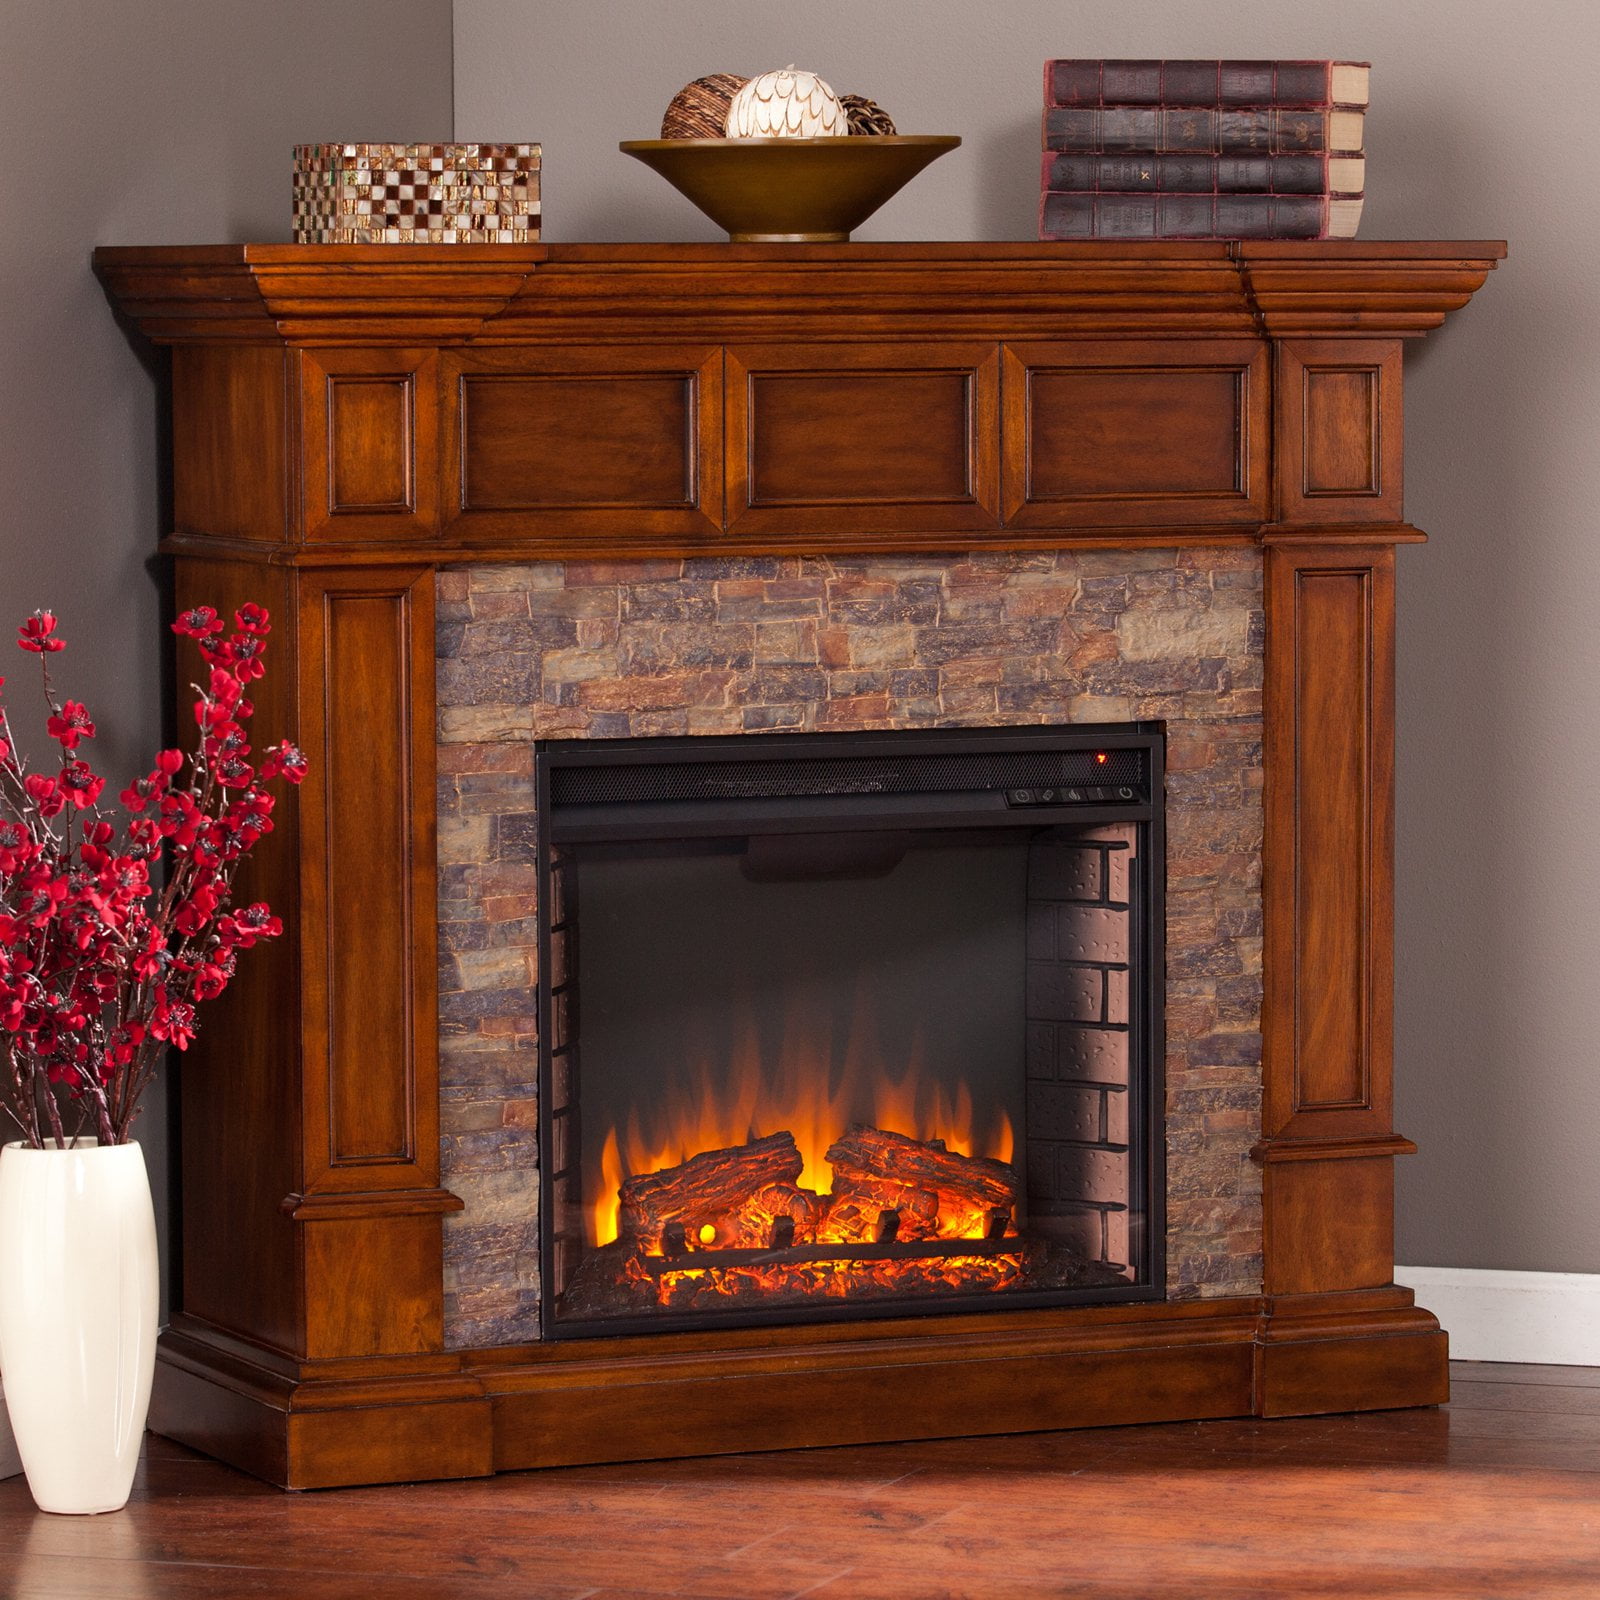 15 People You Oughta Know in the inset free standing flame effect electric fireplaces Industry